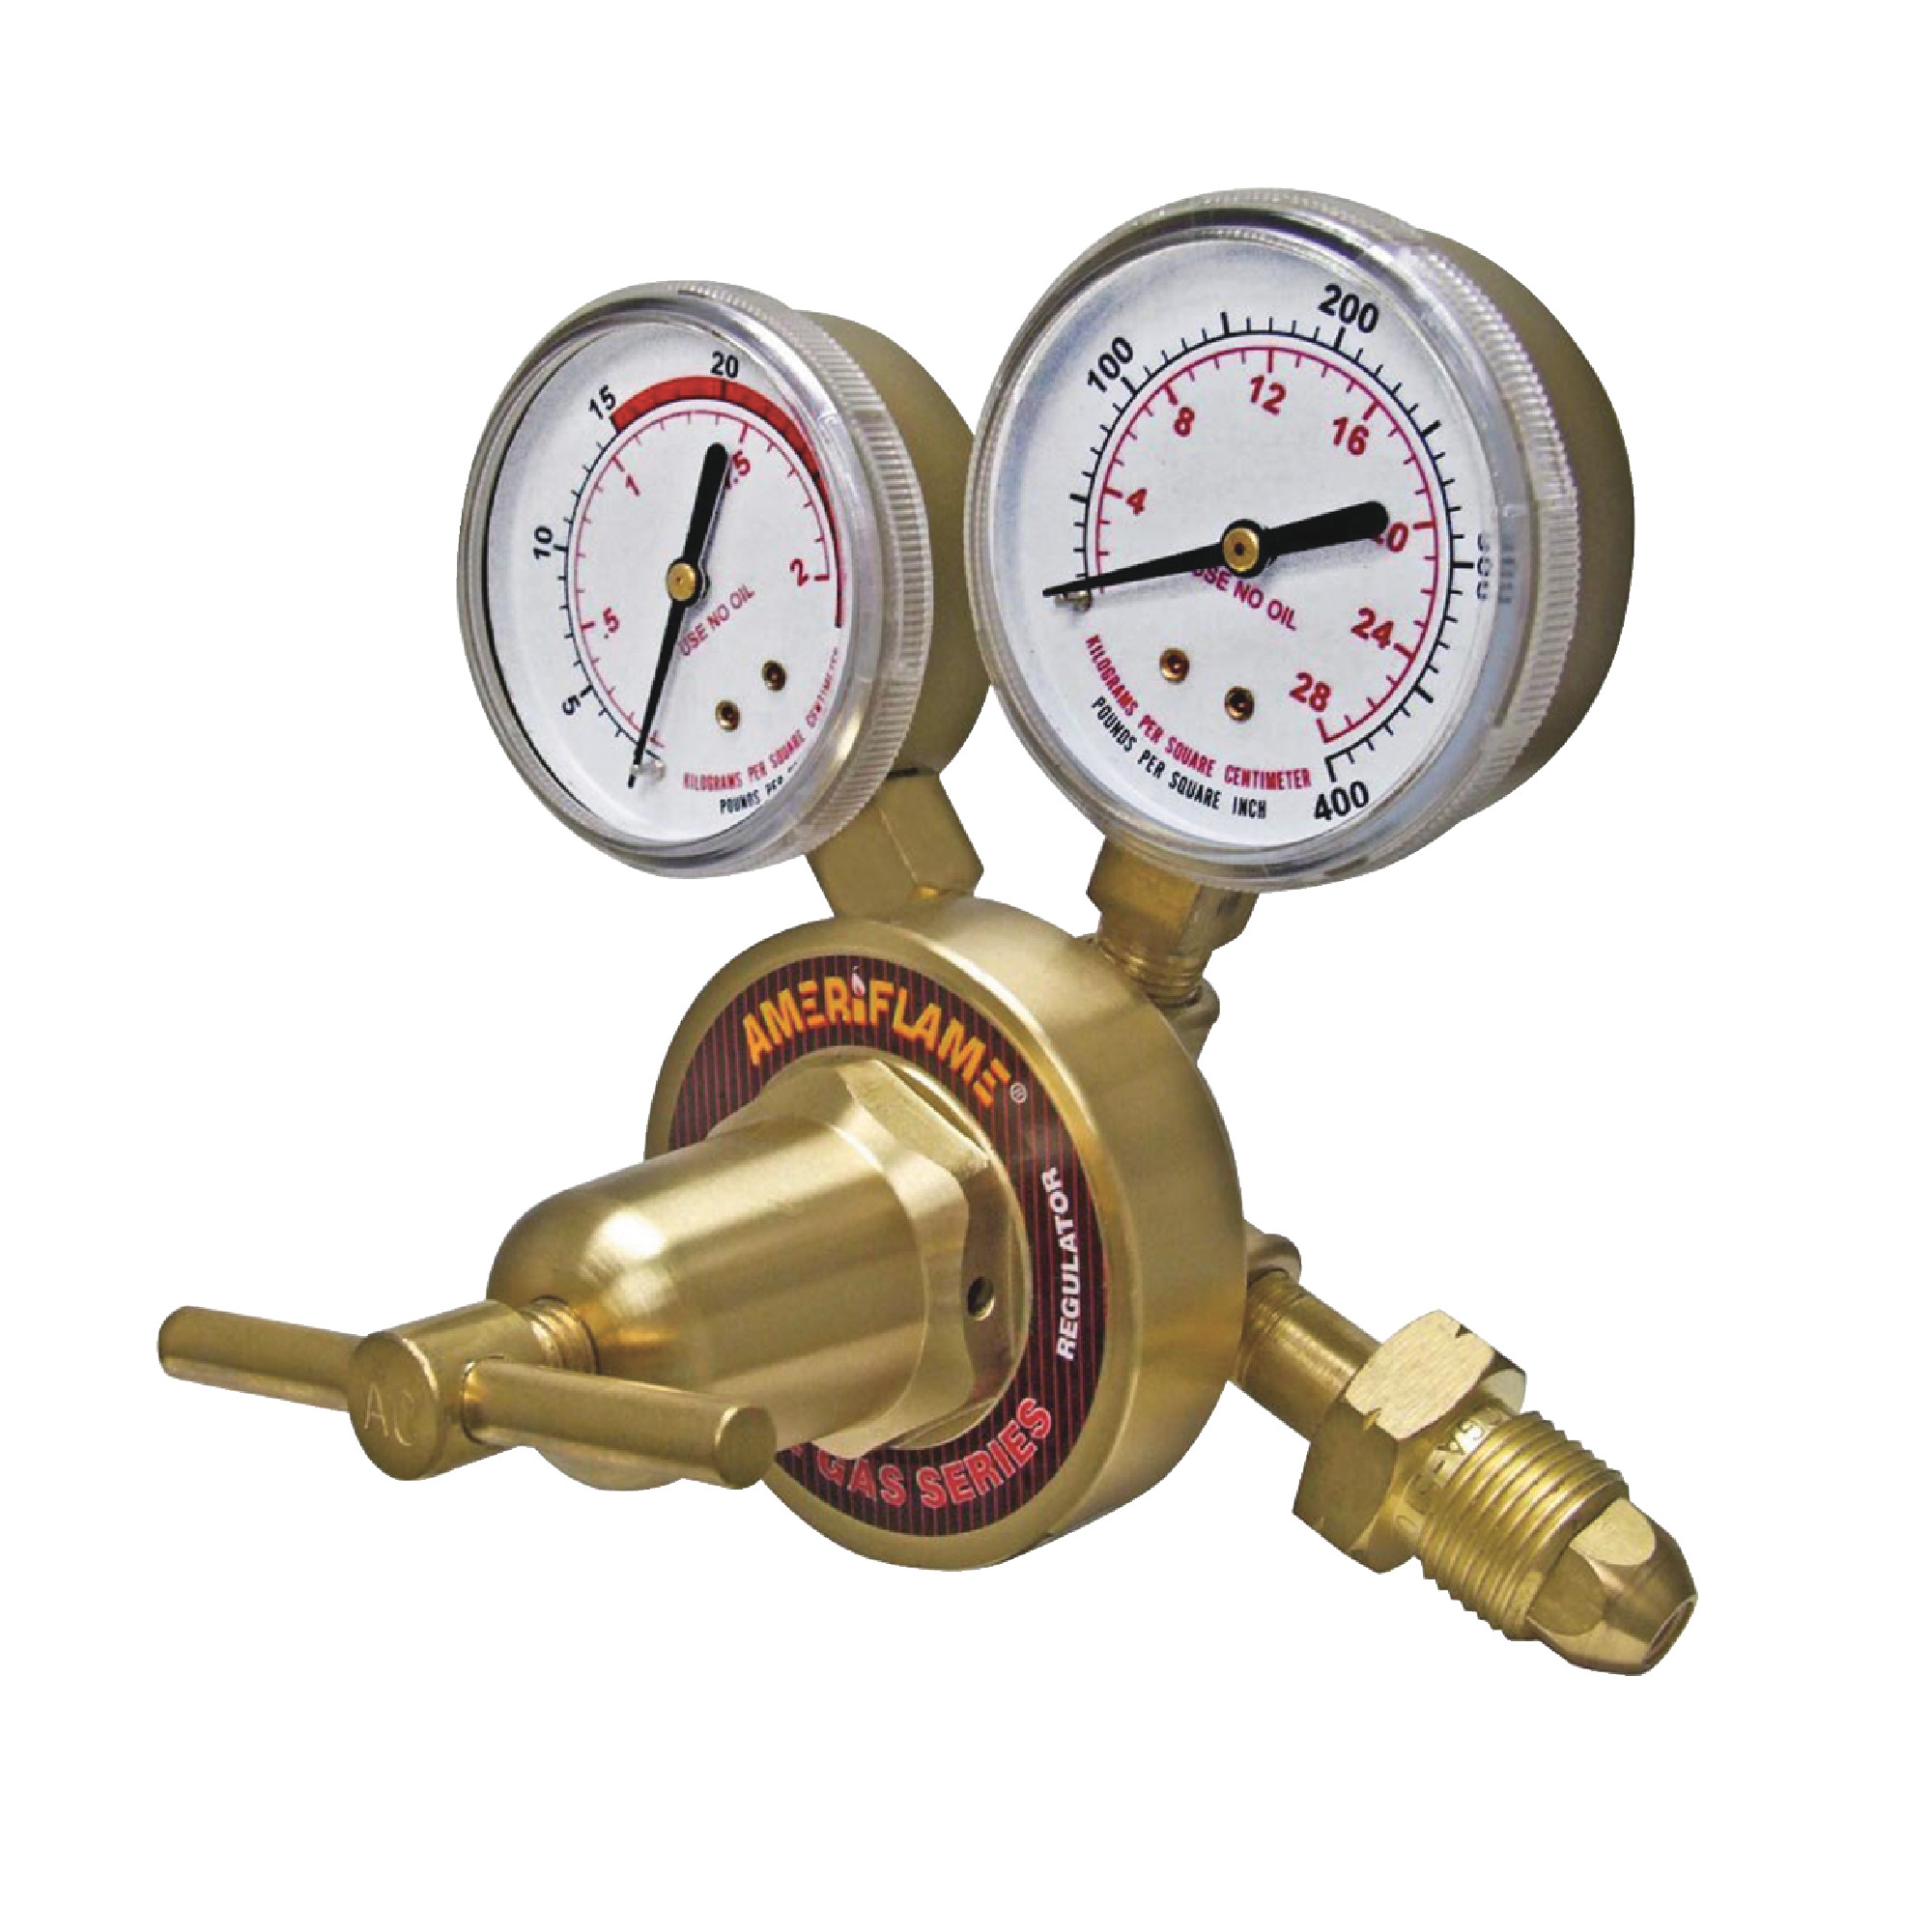 Heavy Duty Single Stage Acetylene Regulator With 2-1/2" Dual Scale Gauges